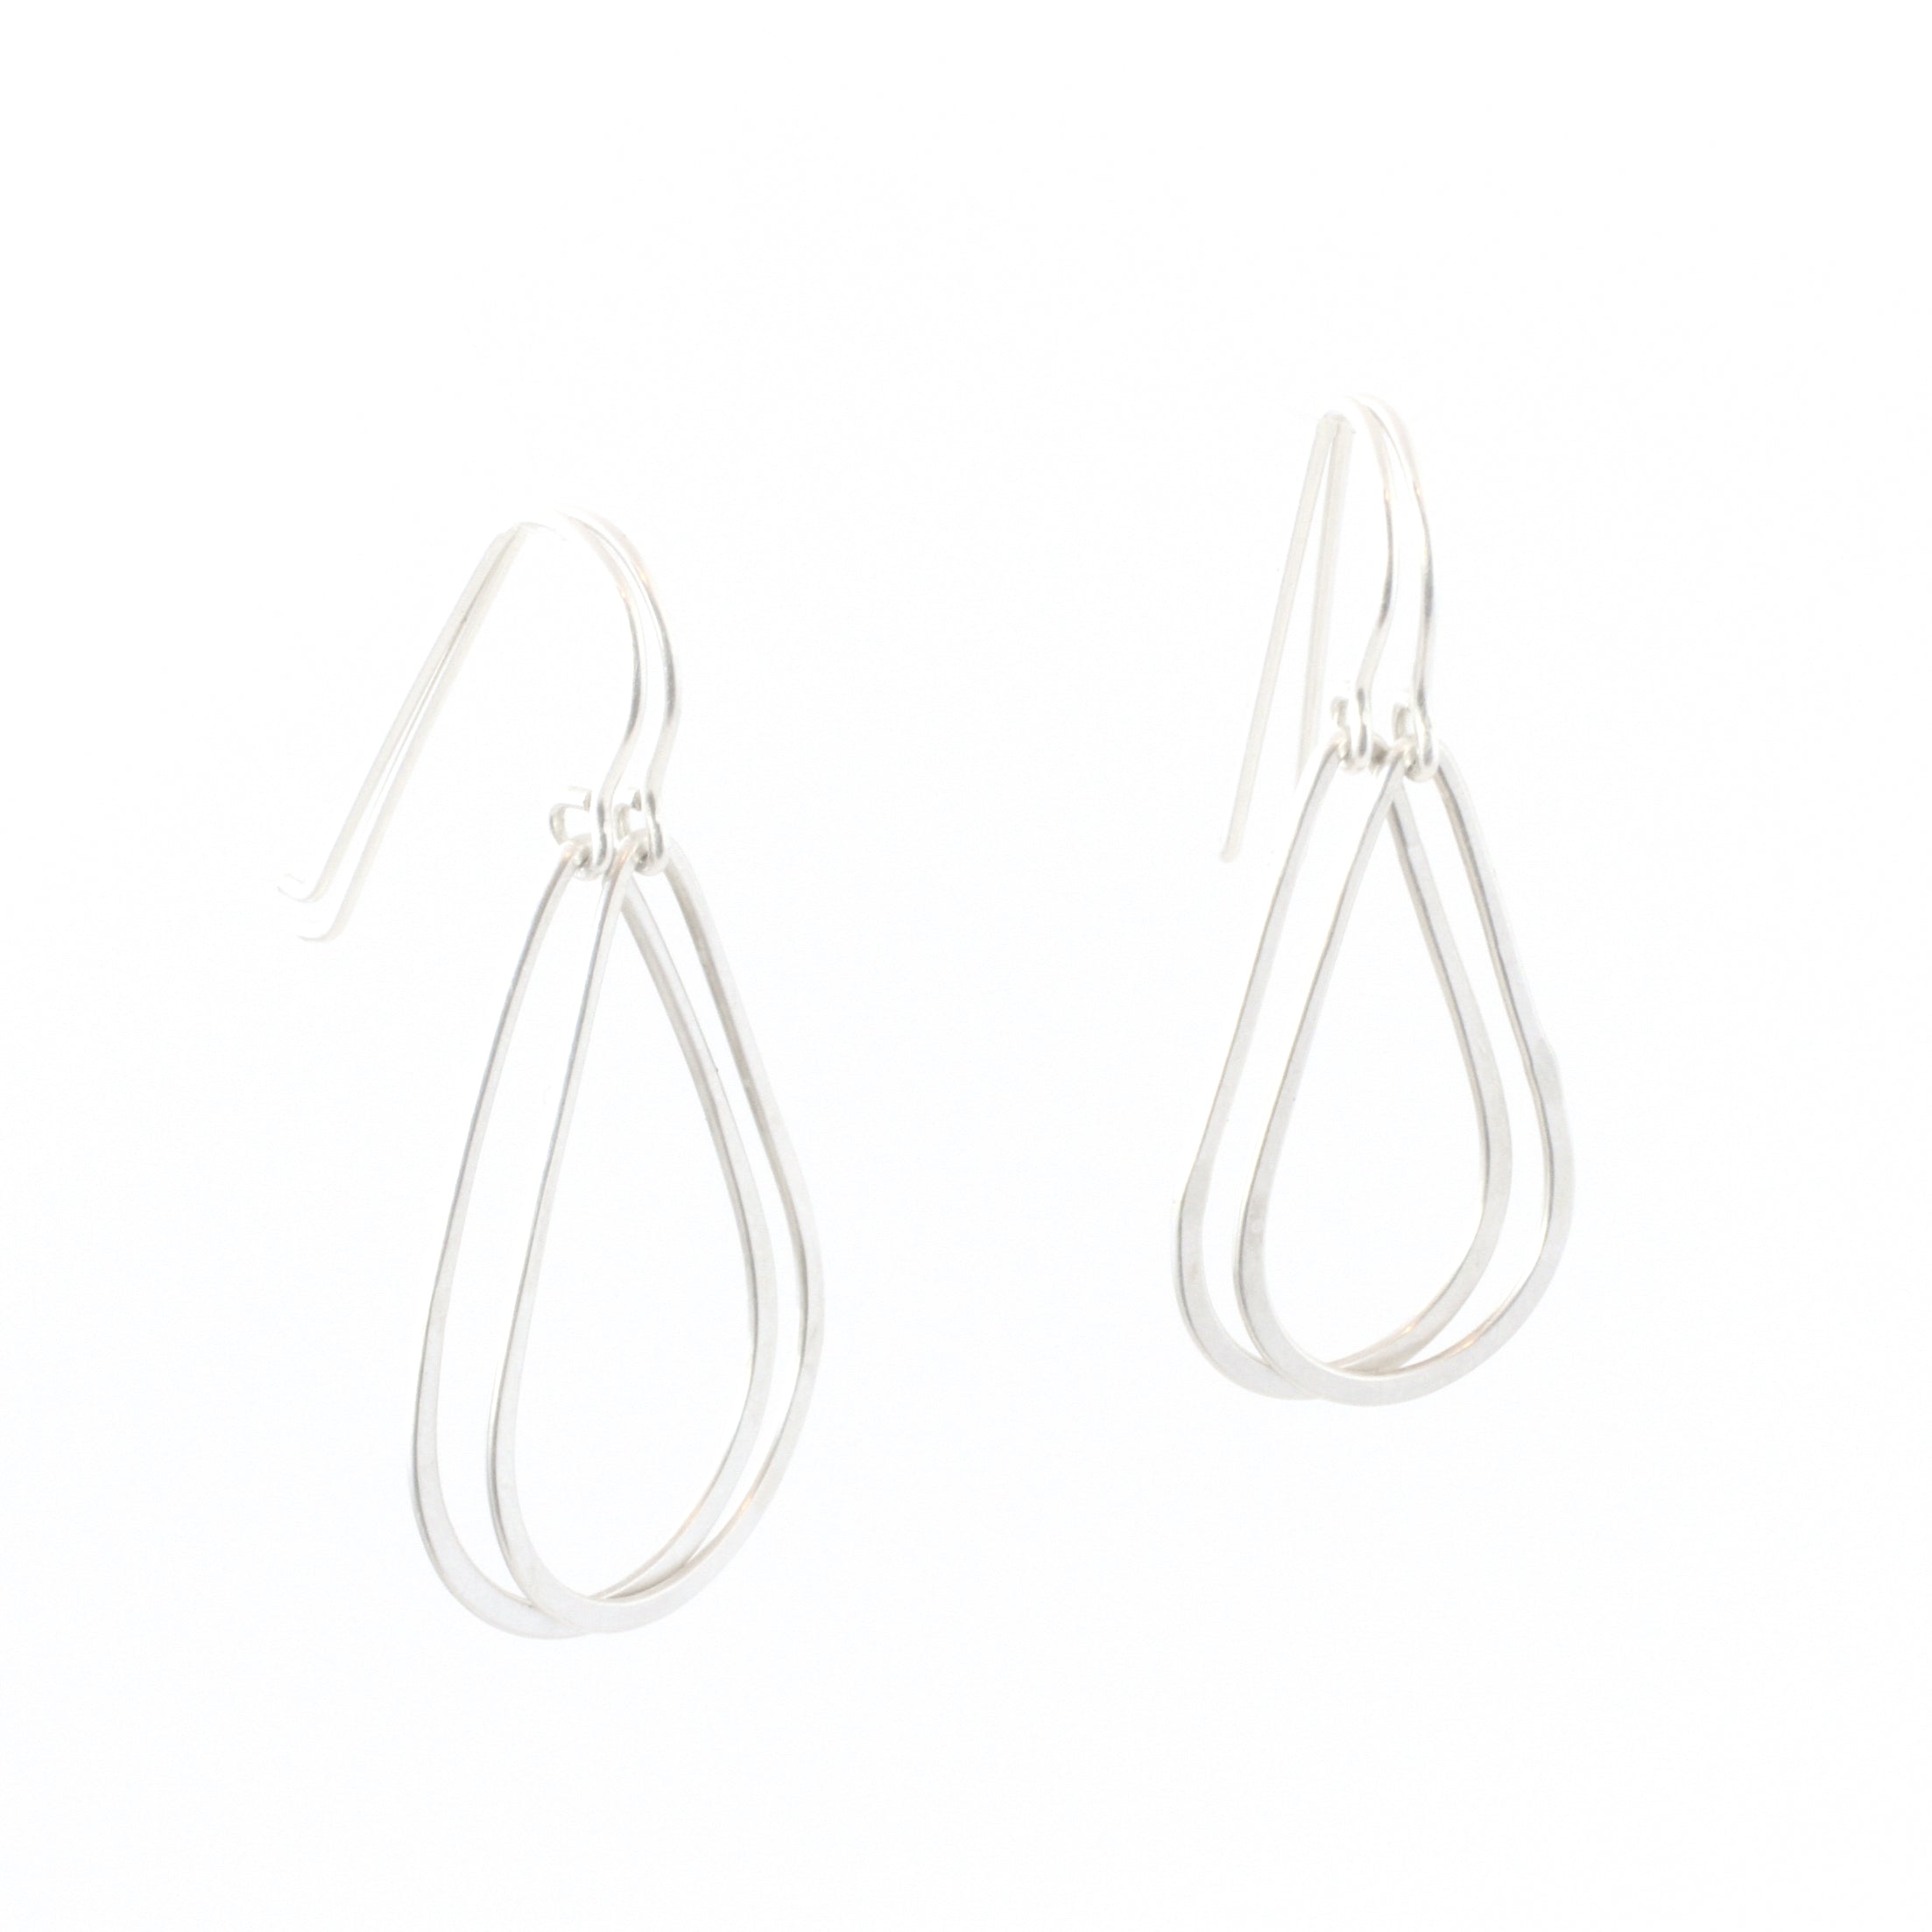 Small and large sizes of teardrop shaped earrings, hanging next to each other.